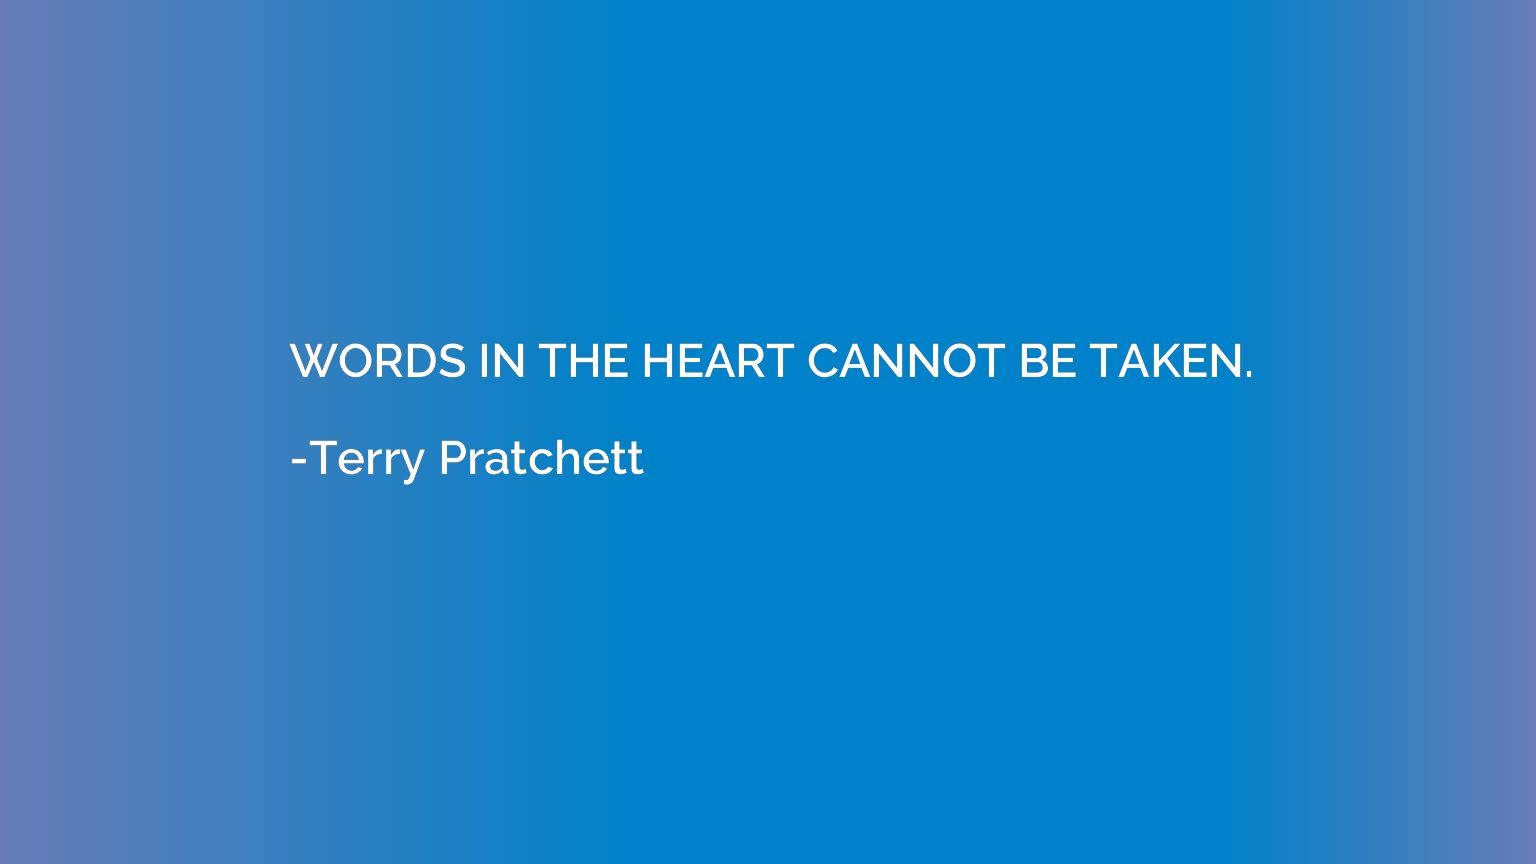 WORDS IN THE HEART CANNOT BE TAKEN.